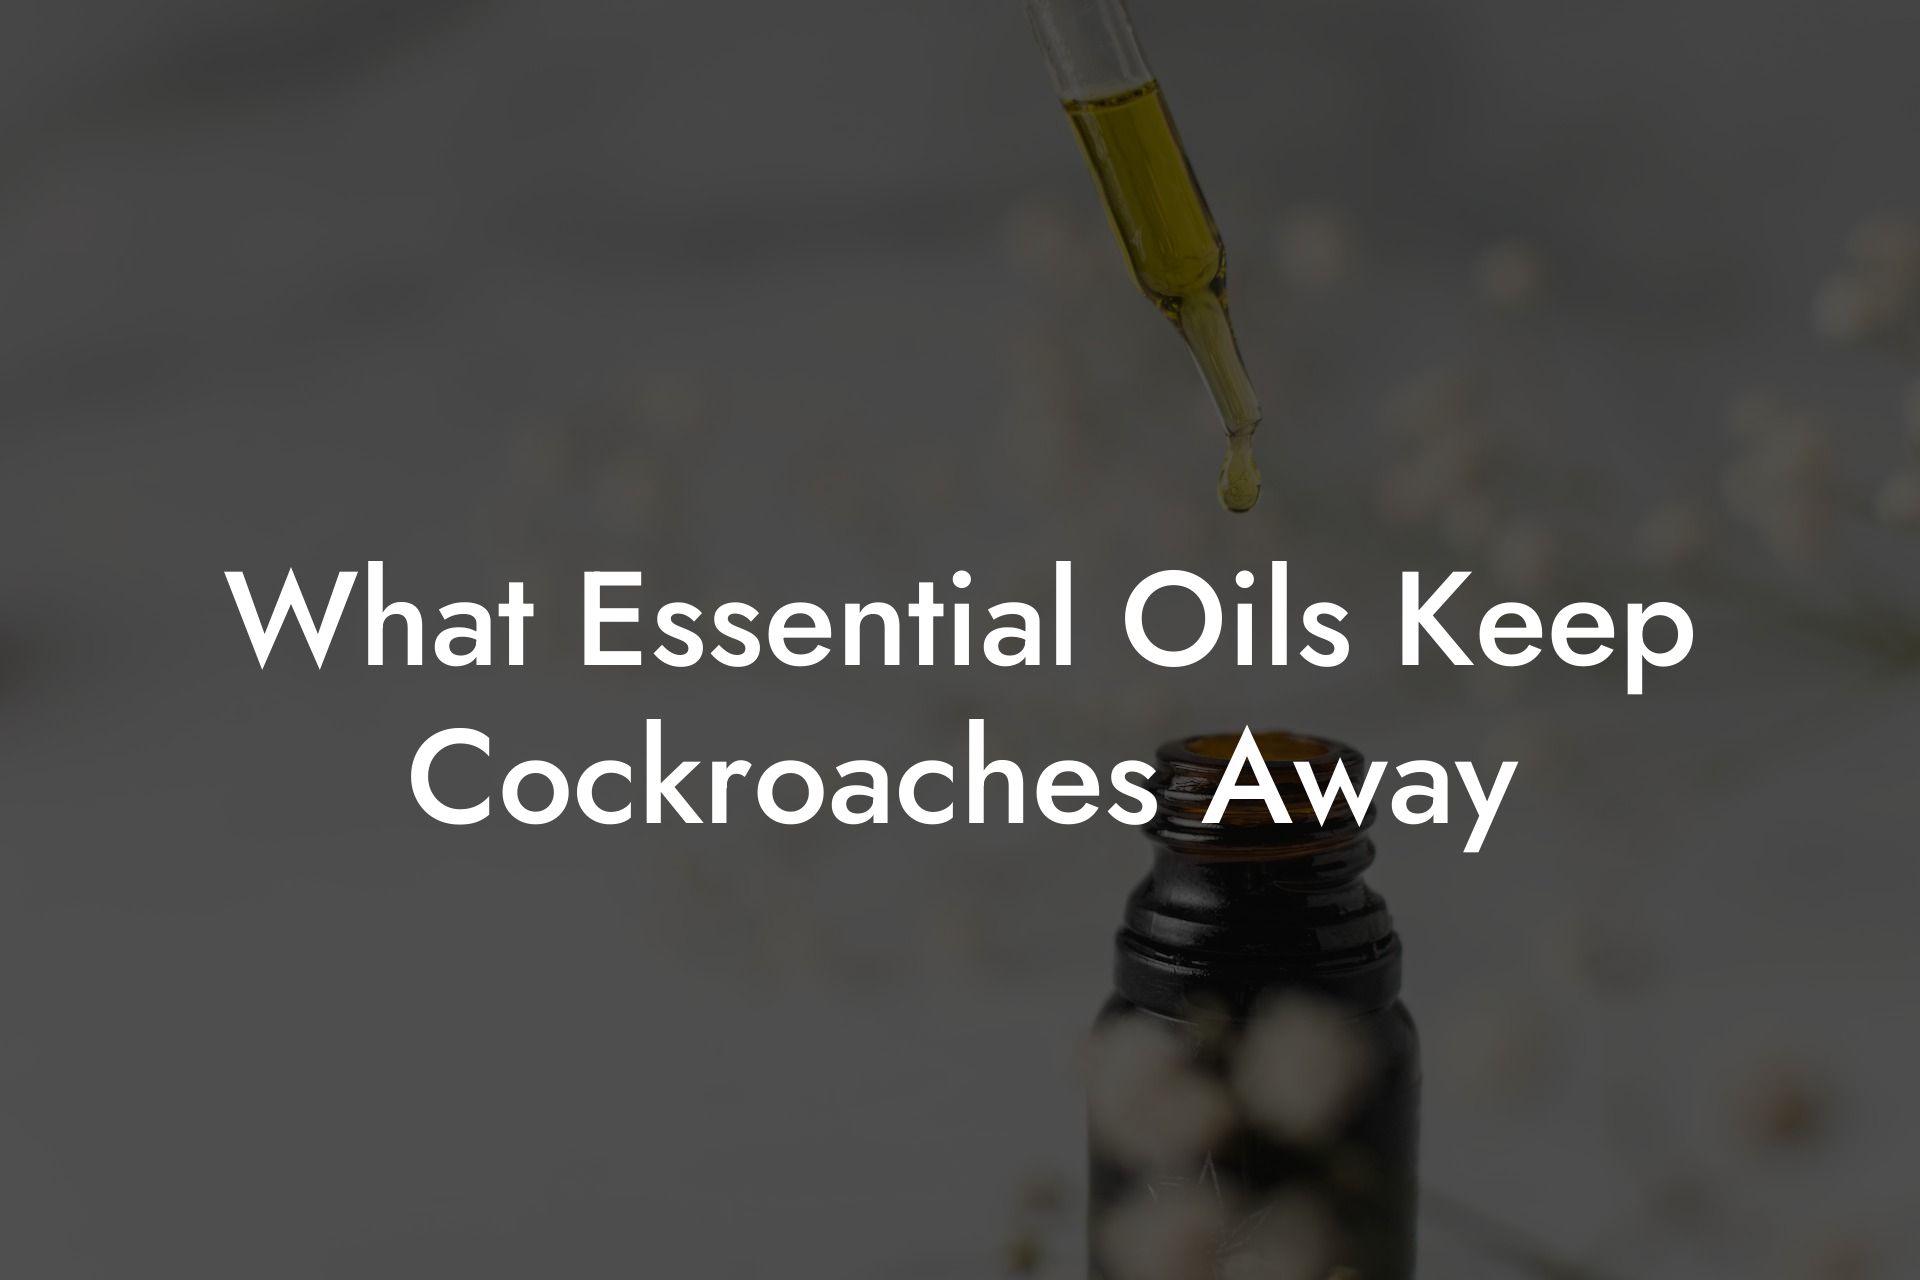 What Essential Oils Keep Cockroaches Away